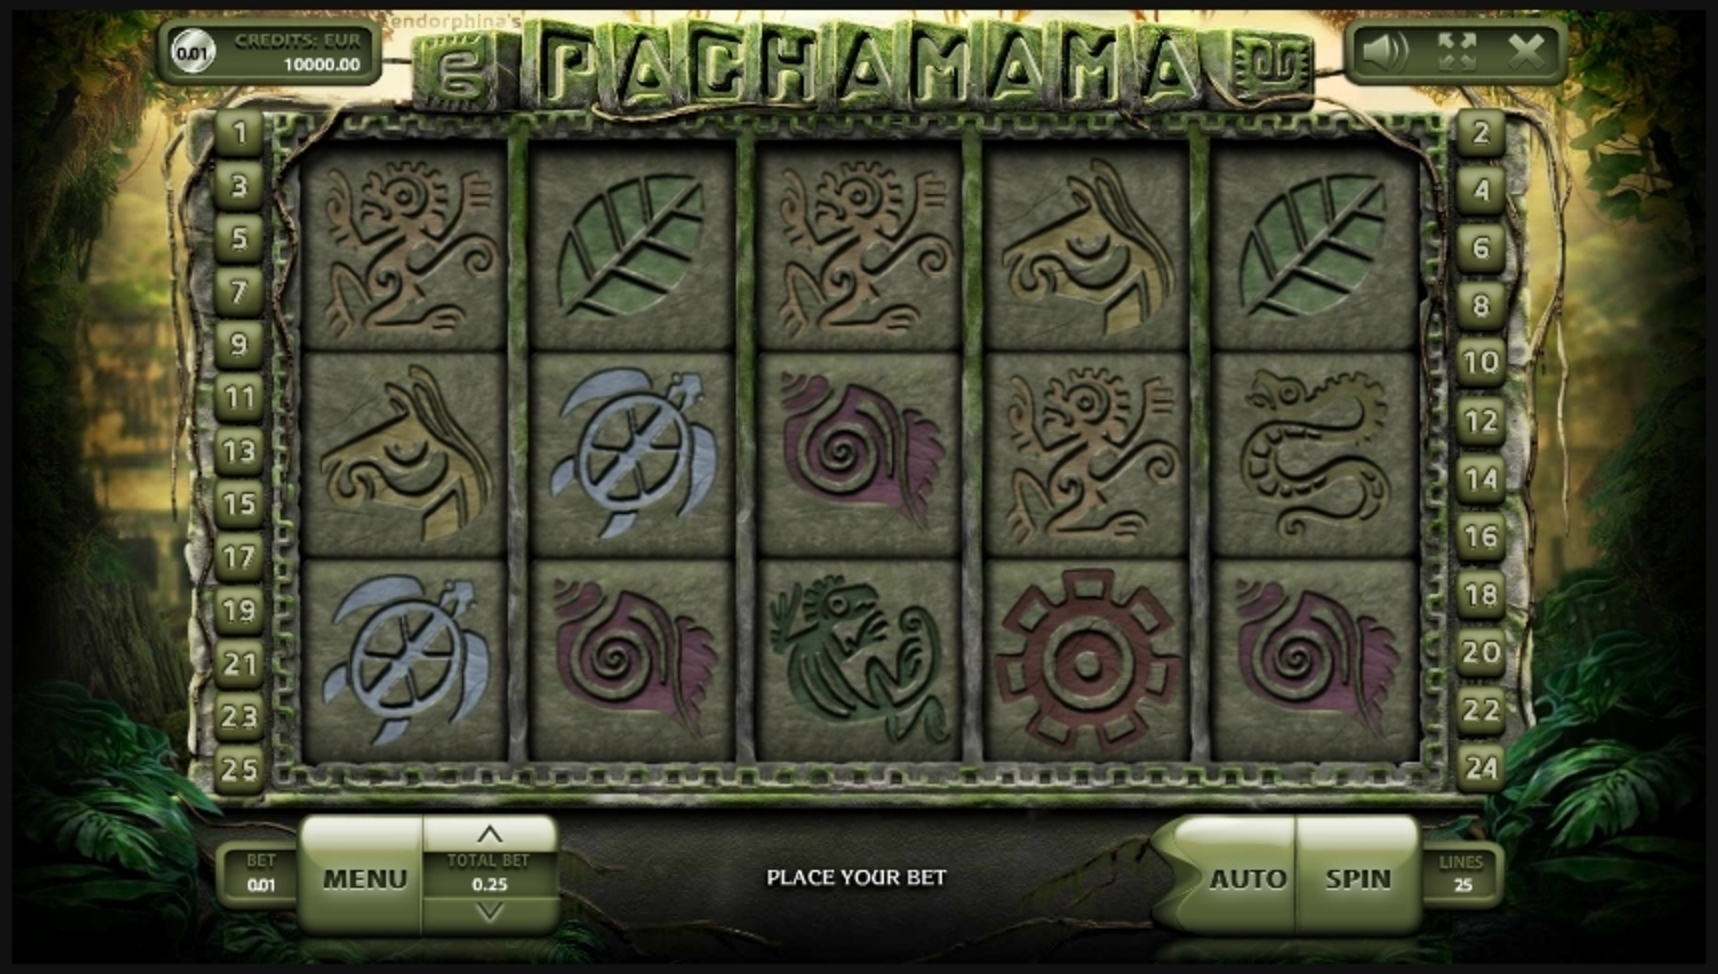 Reels in Pachamama Slot Game by Endorphina